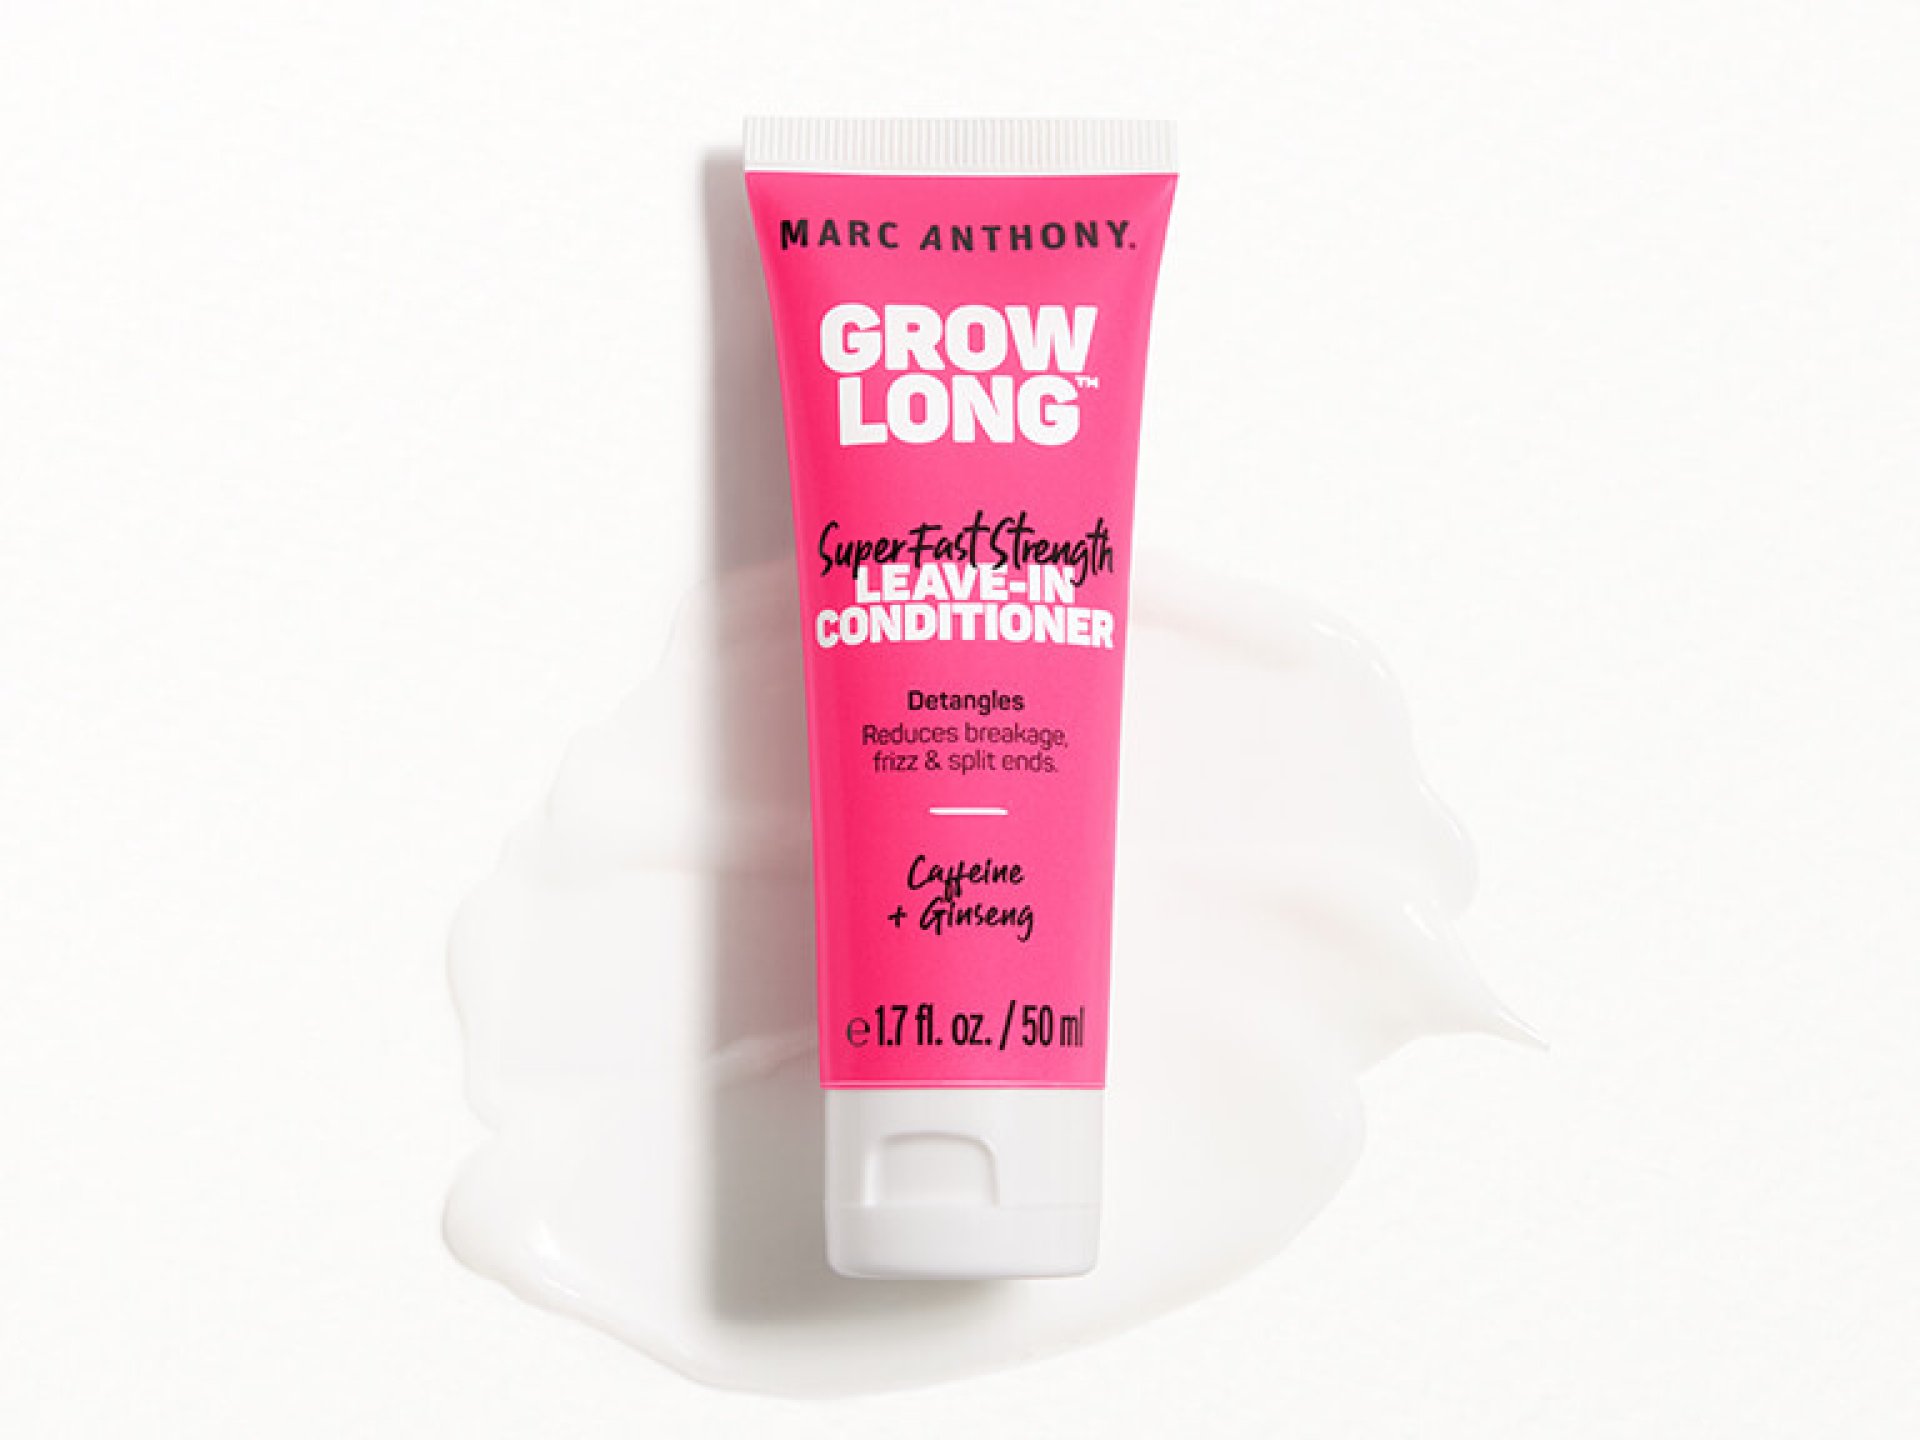 MARC ANTHONY Grow Long Super Fast Strength Leave-in Conditioner